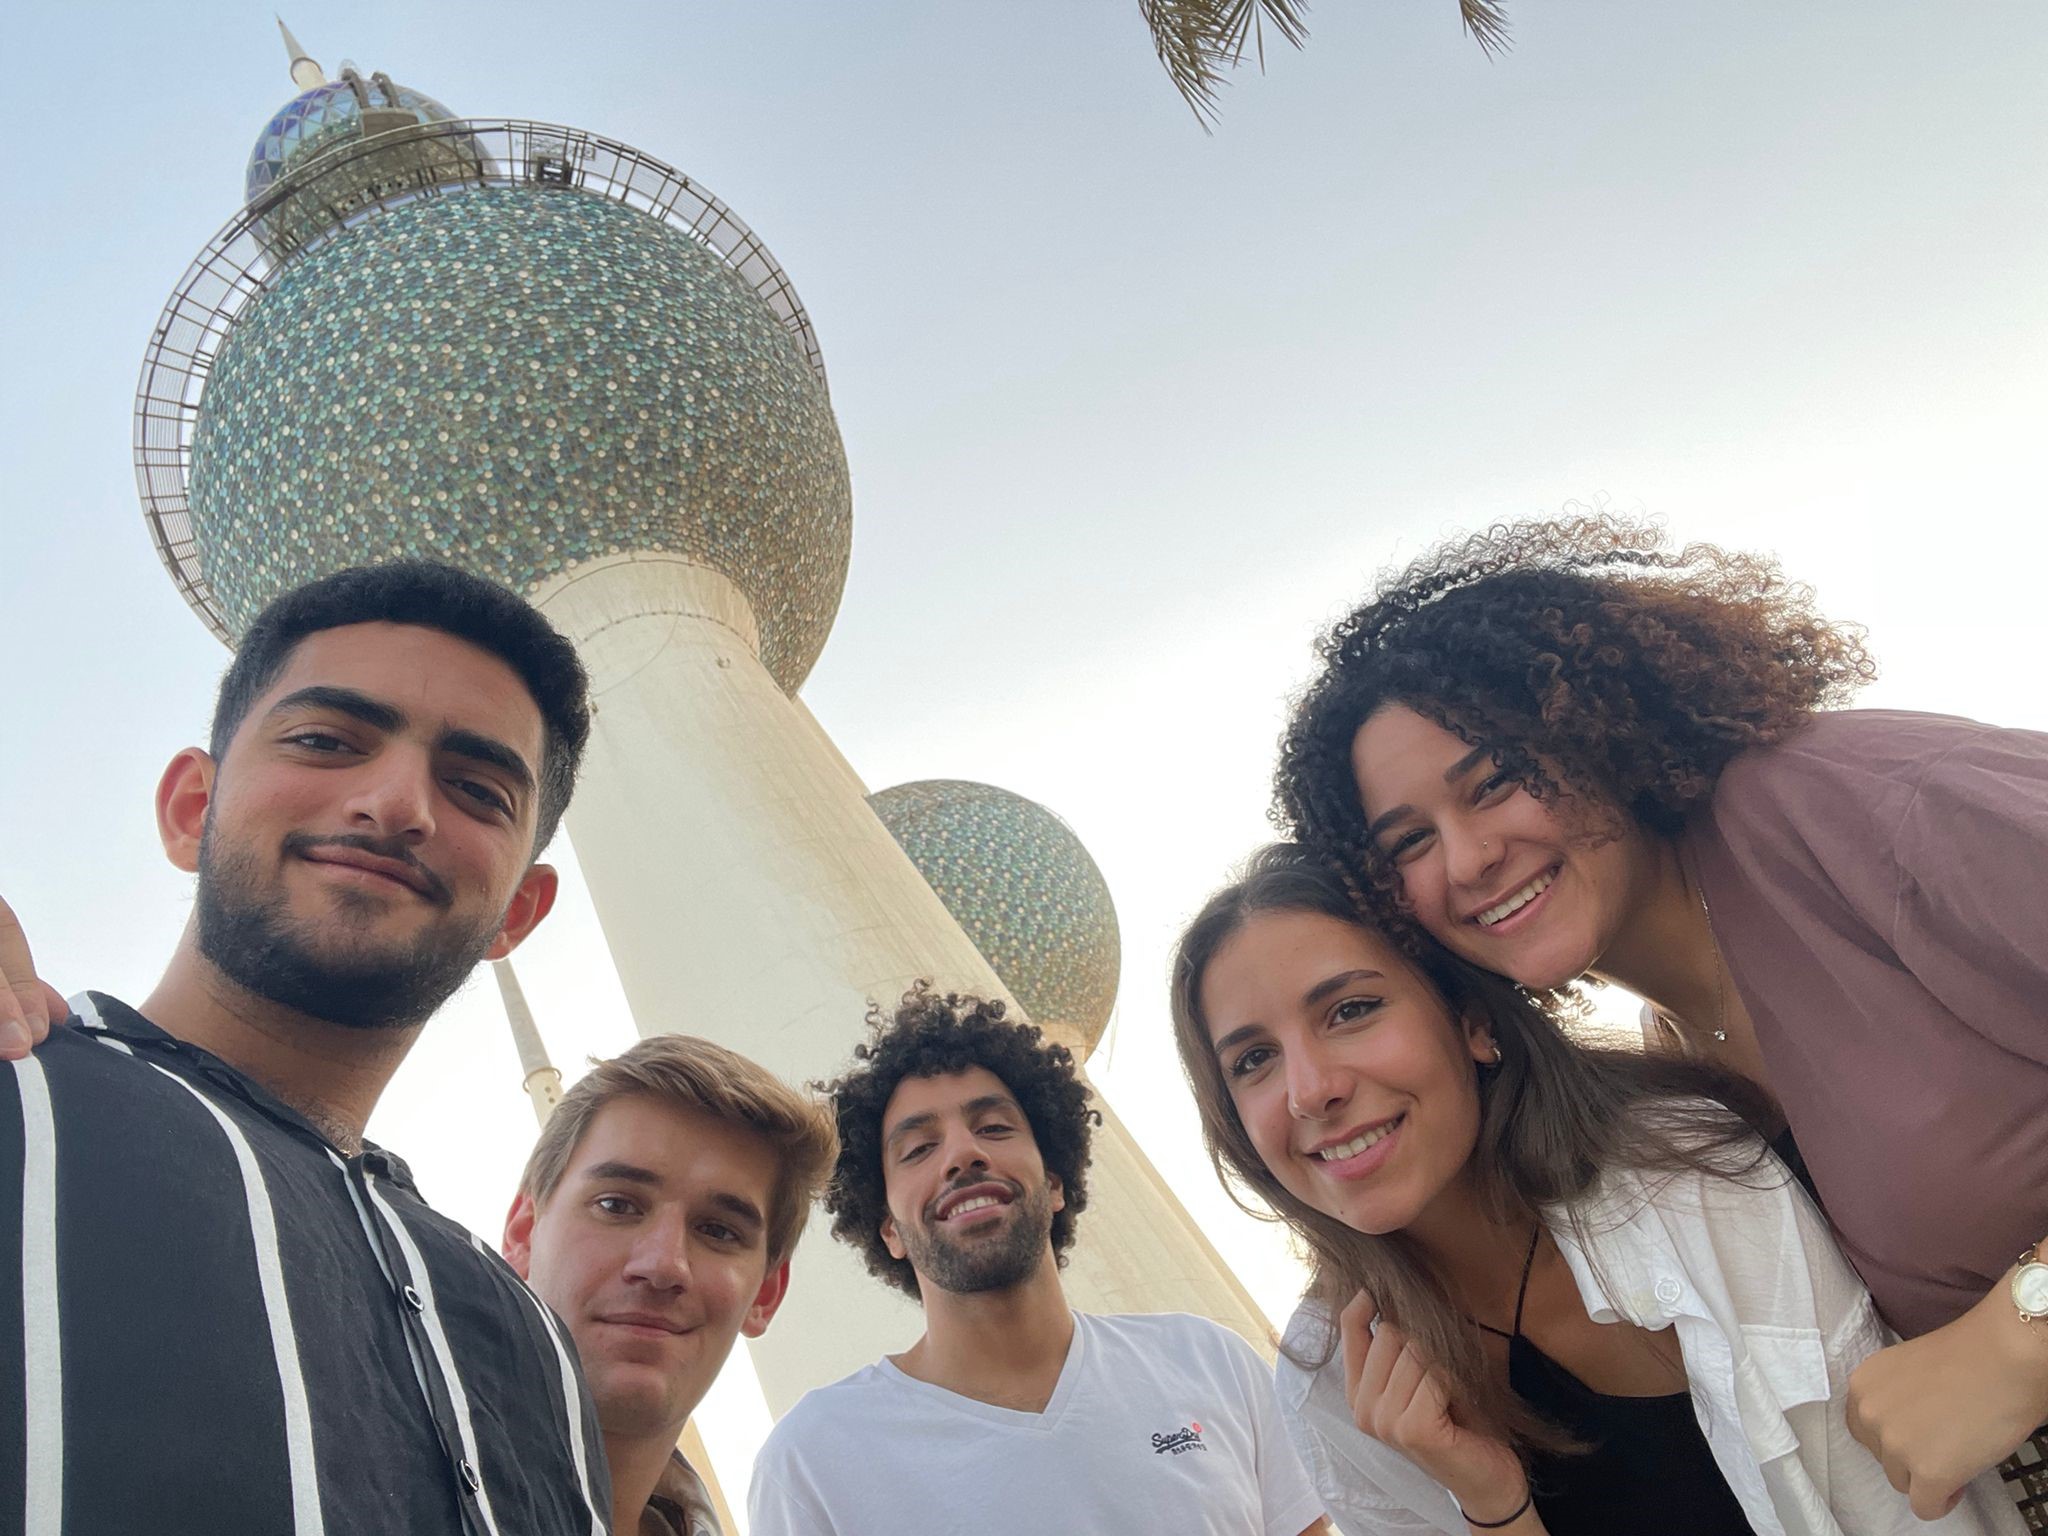 “The most rewarding aspects of my study abroad experience included getting to know students at AUK and hearing their unique backgrounds and perspectives.”    -Matt Pfundstein ‘24, Exchange student